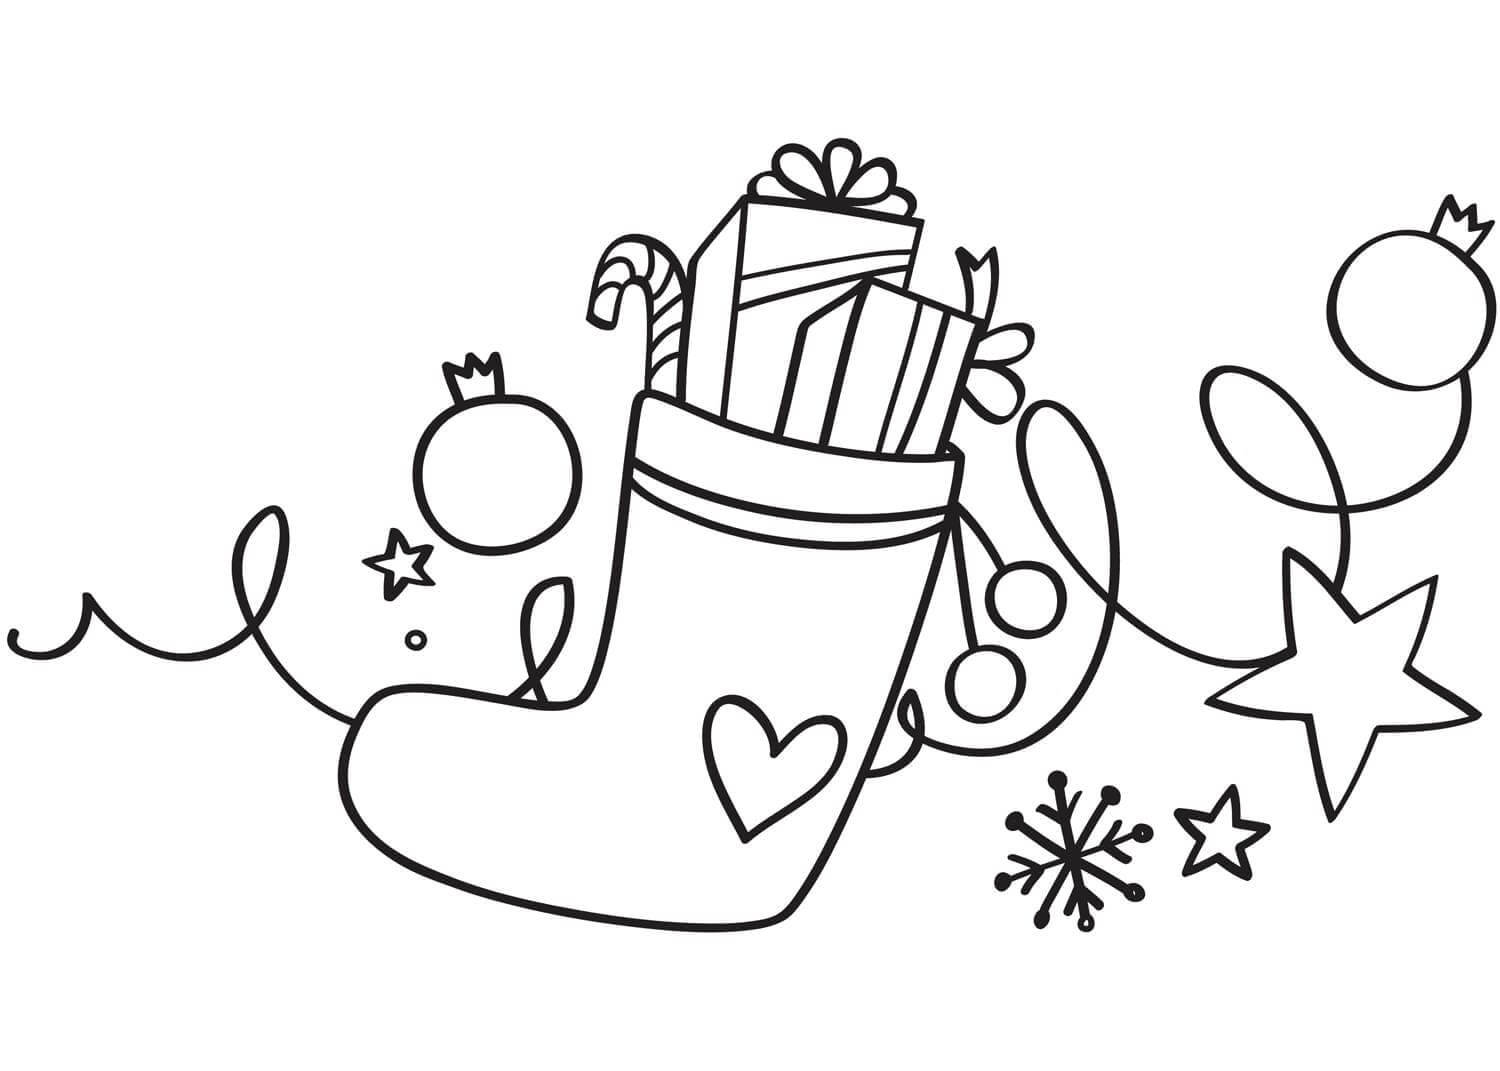 Decorations Christmas Stockings Coloring Page